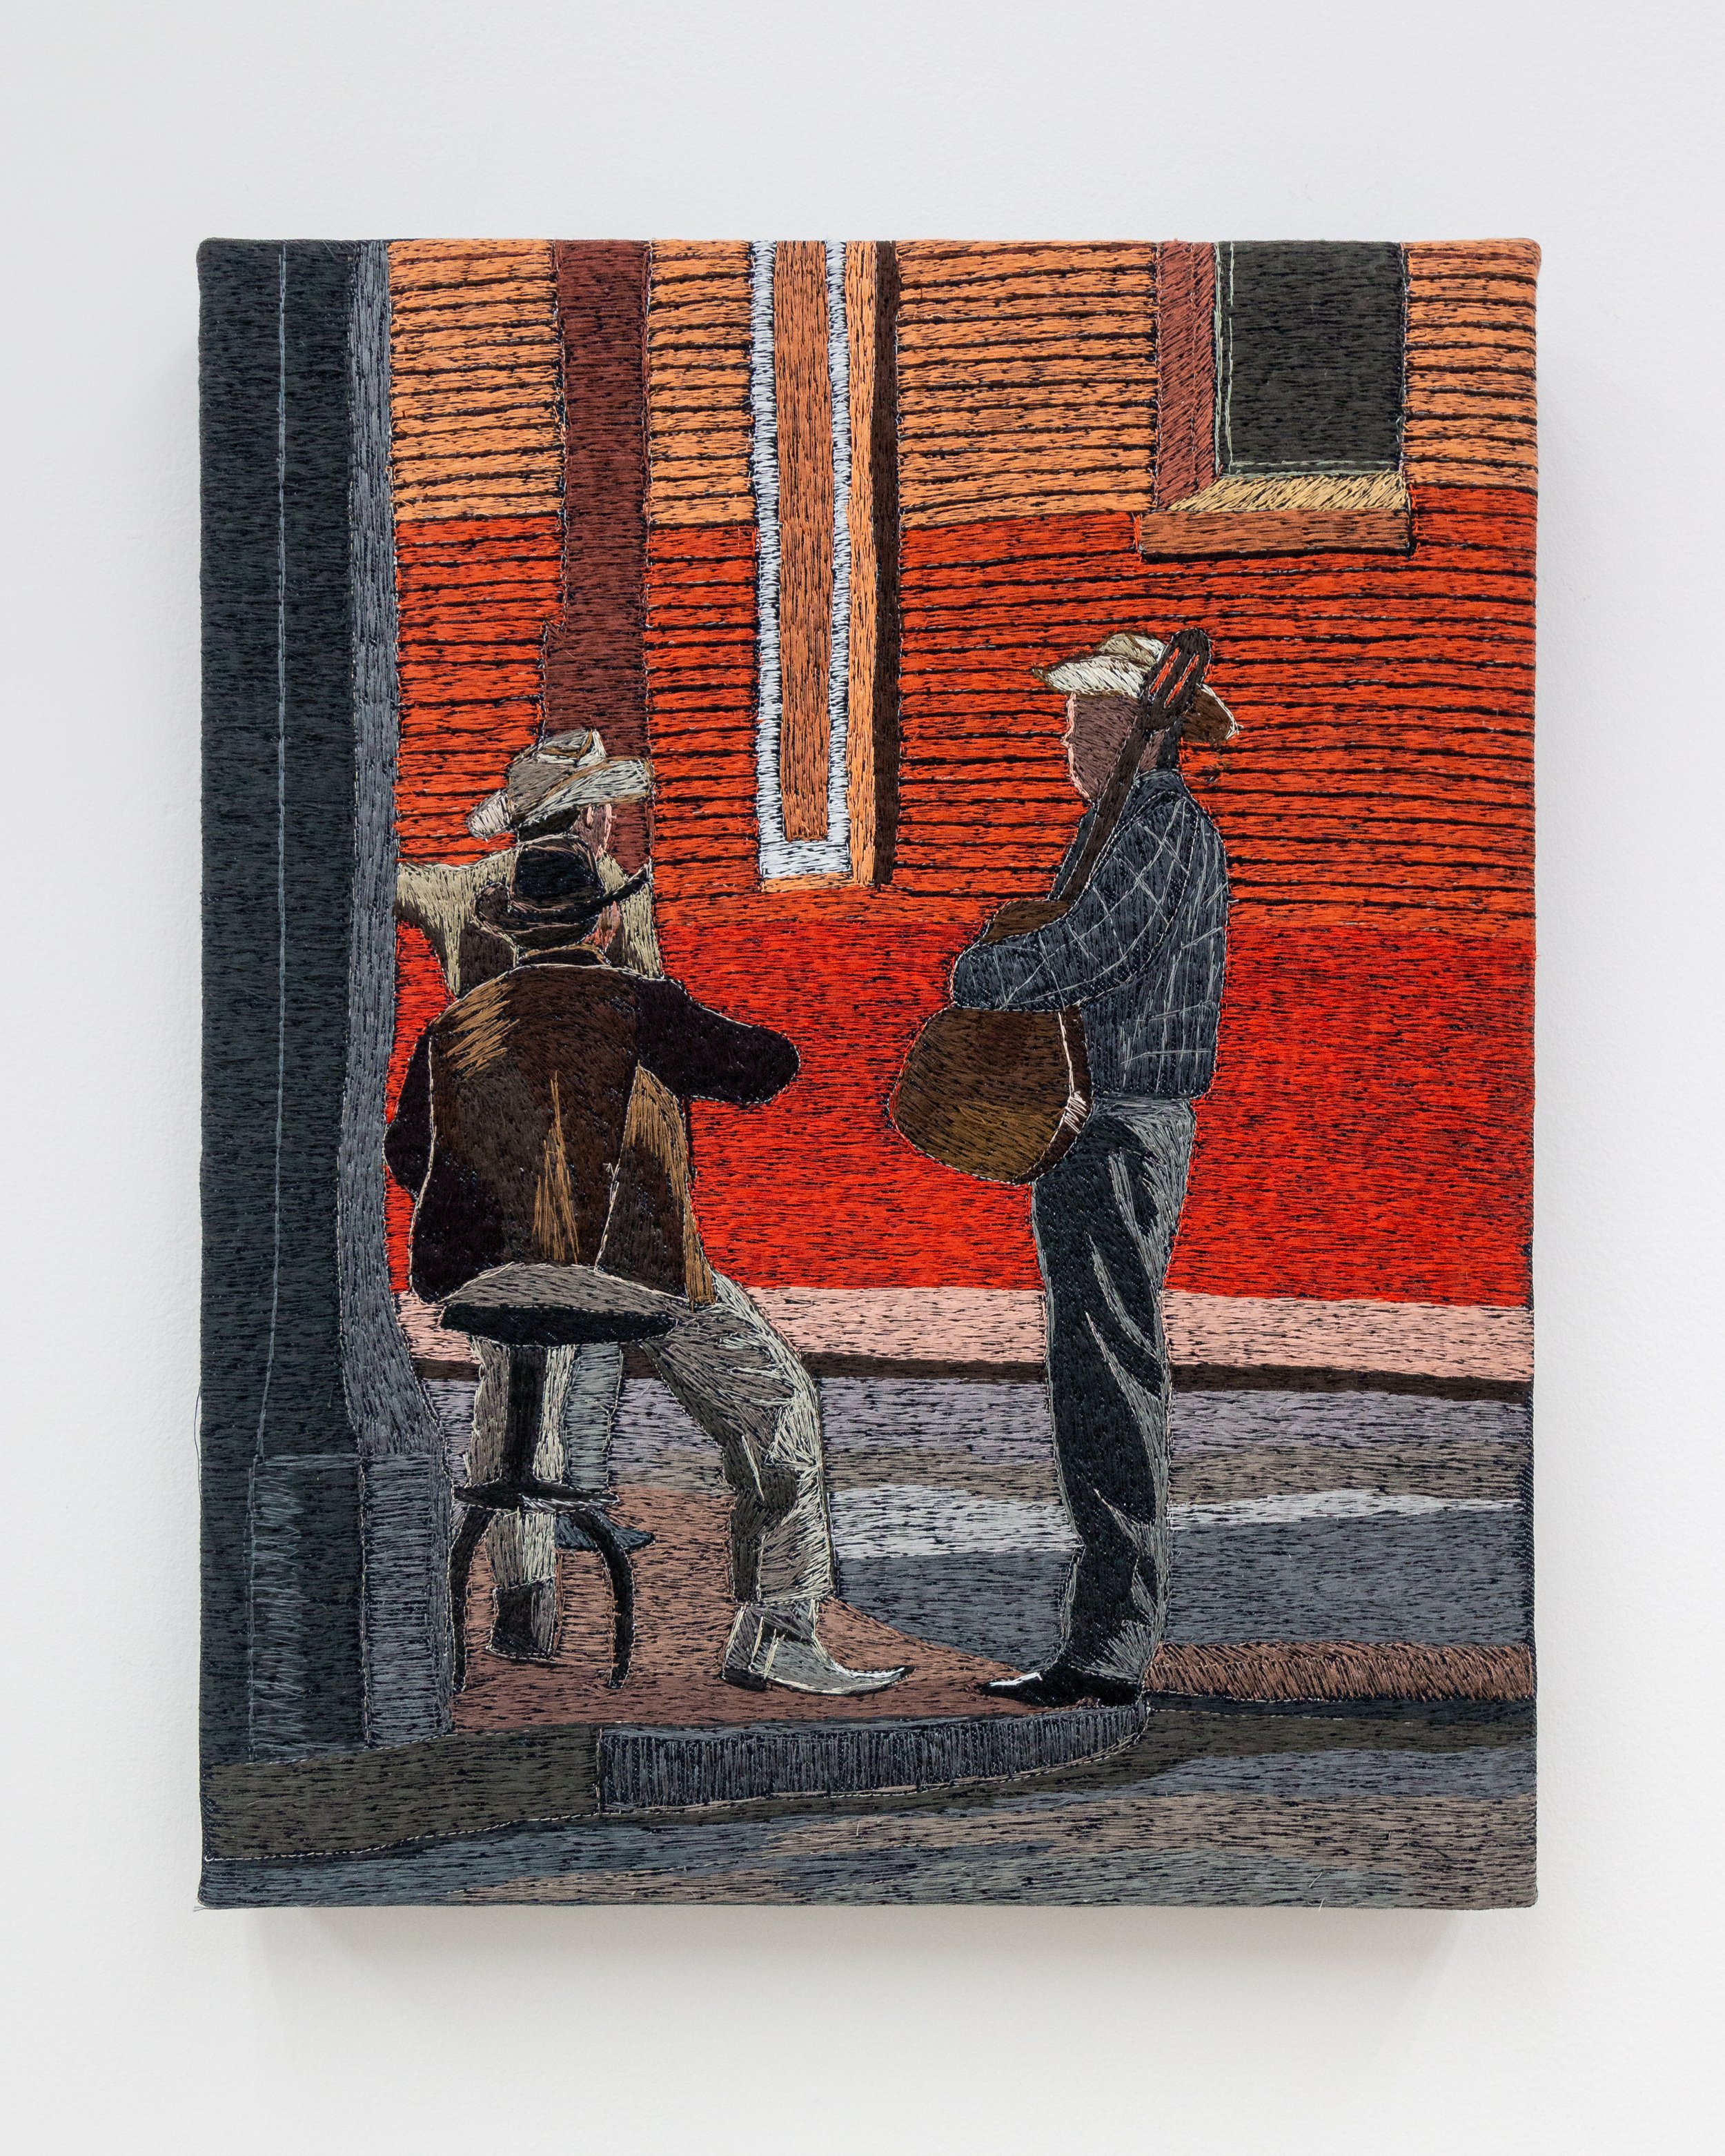  Musicians on Chavez Ave. (sunset), 2023  16x20 inches  polyester thread on denim 